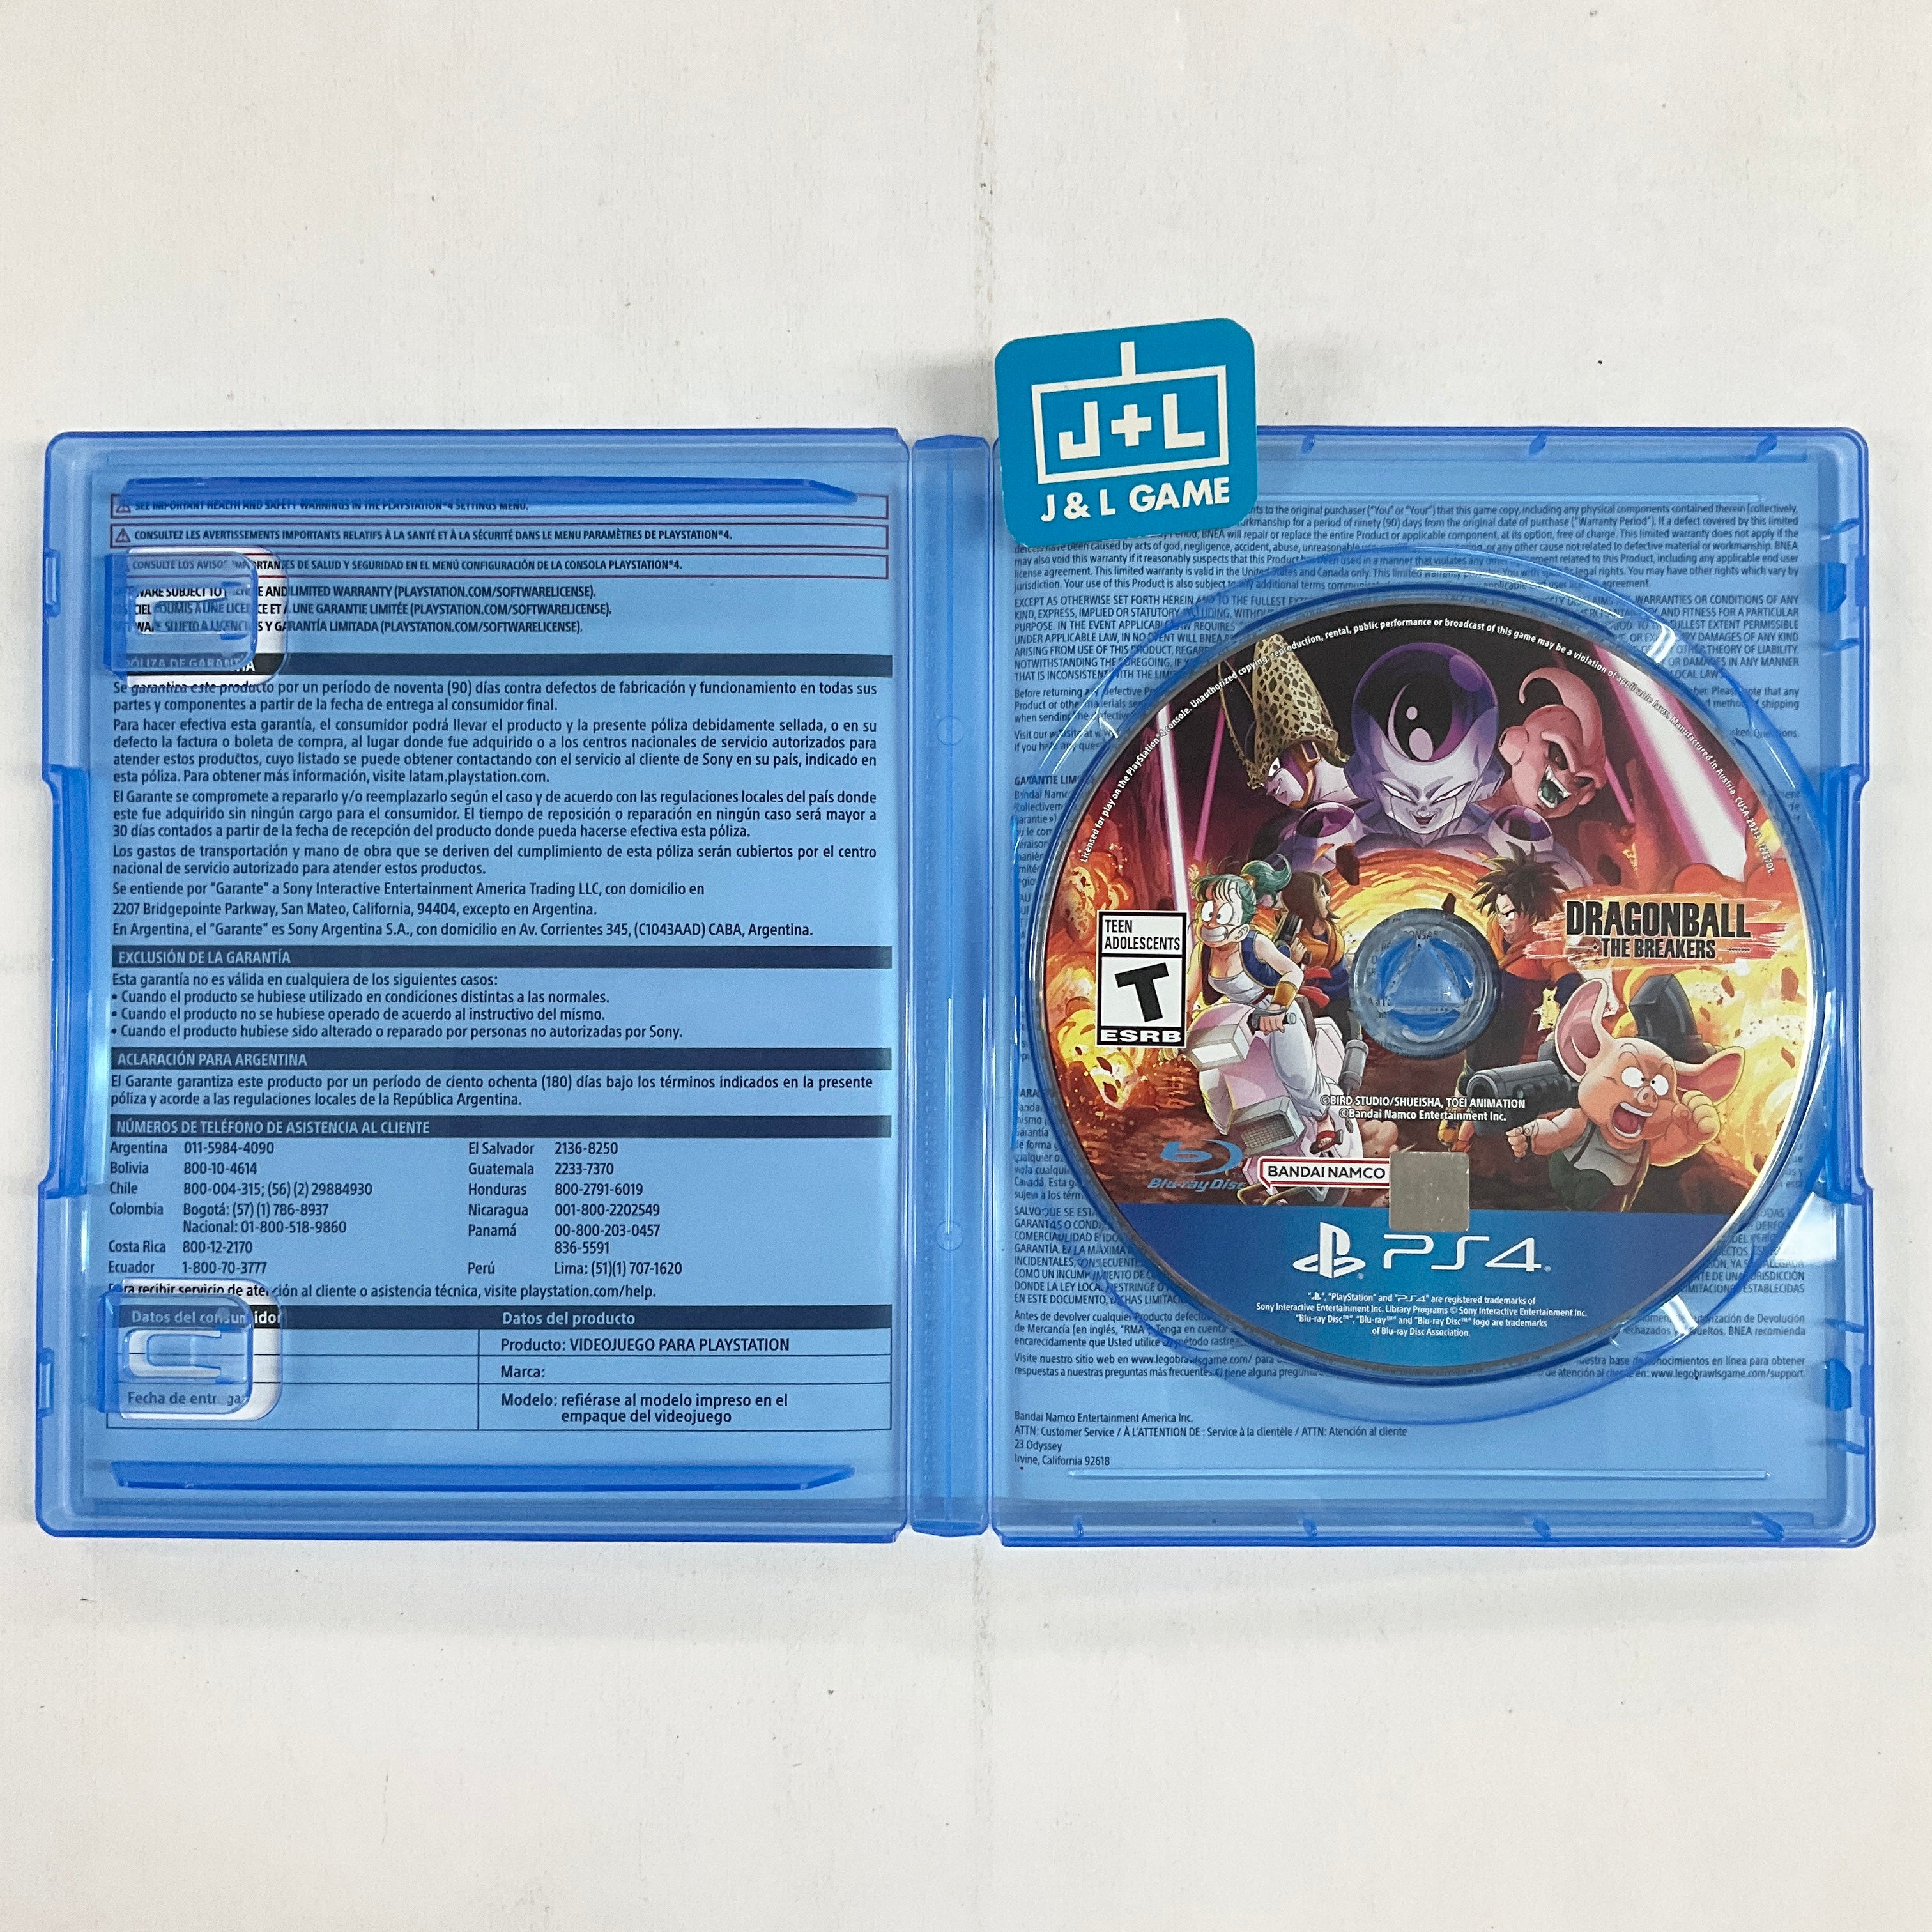 Dragon Ball: The Breakers (Special Edition) - (PS4) PlayStation 4 [Pre-Owned] Video Games BANDAI NAMCO Entertainment   